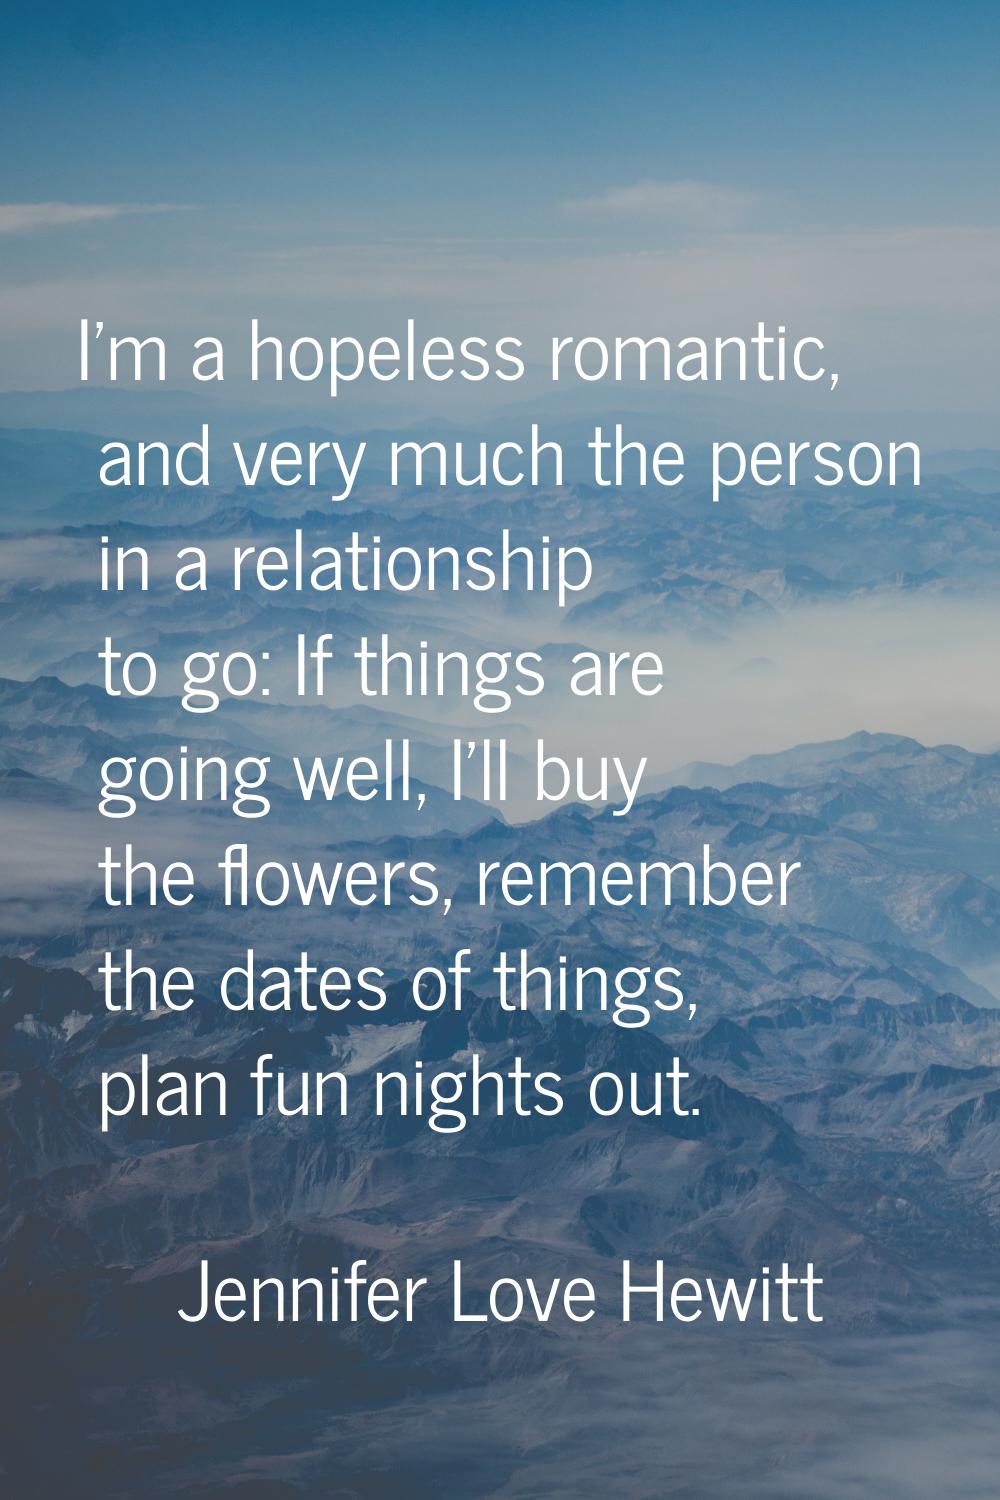 I'm a hopeless romantic, and very much the person in a relationship to go: If things are going well